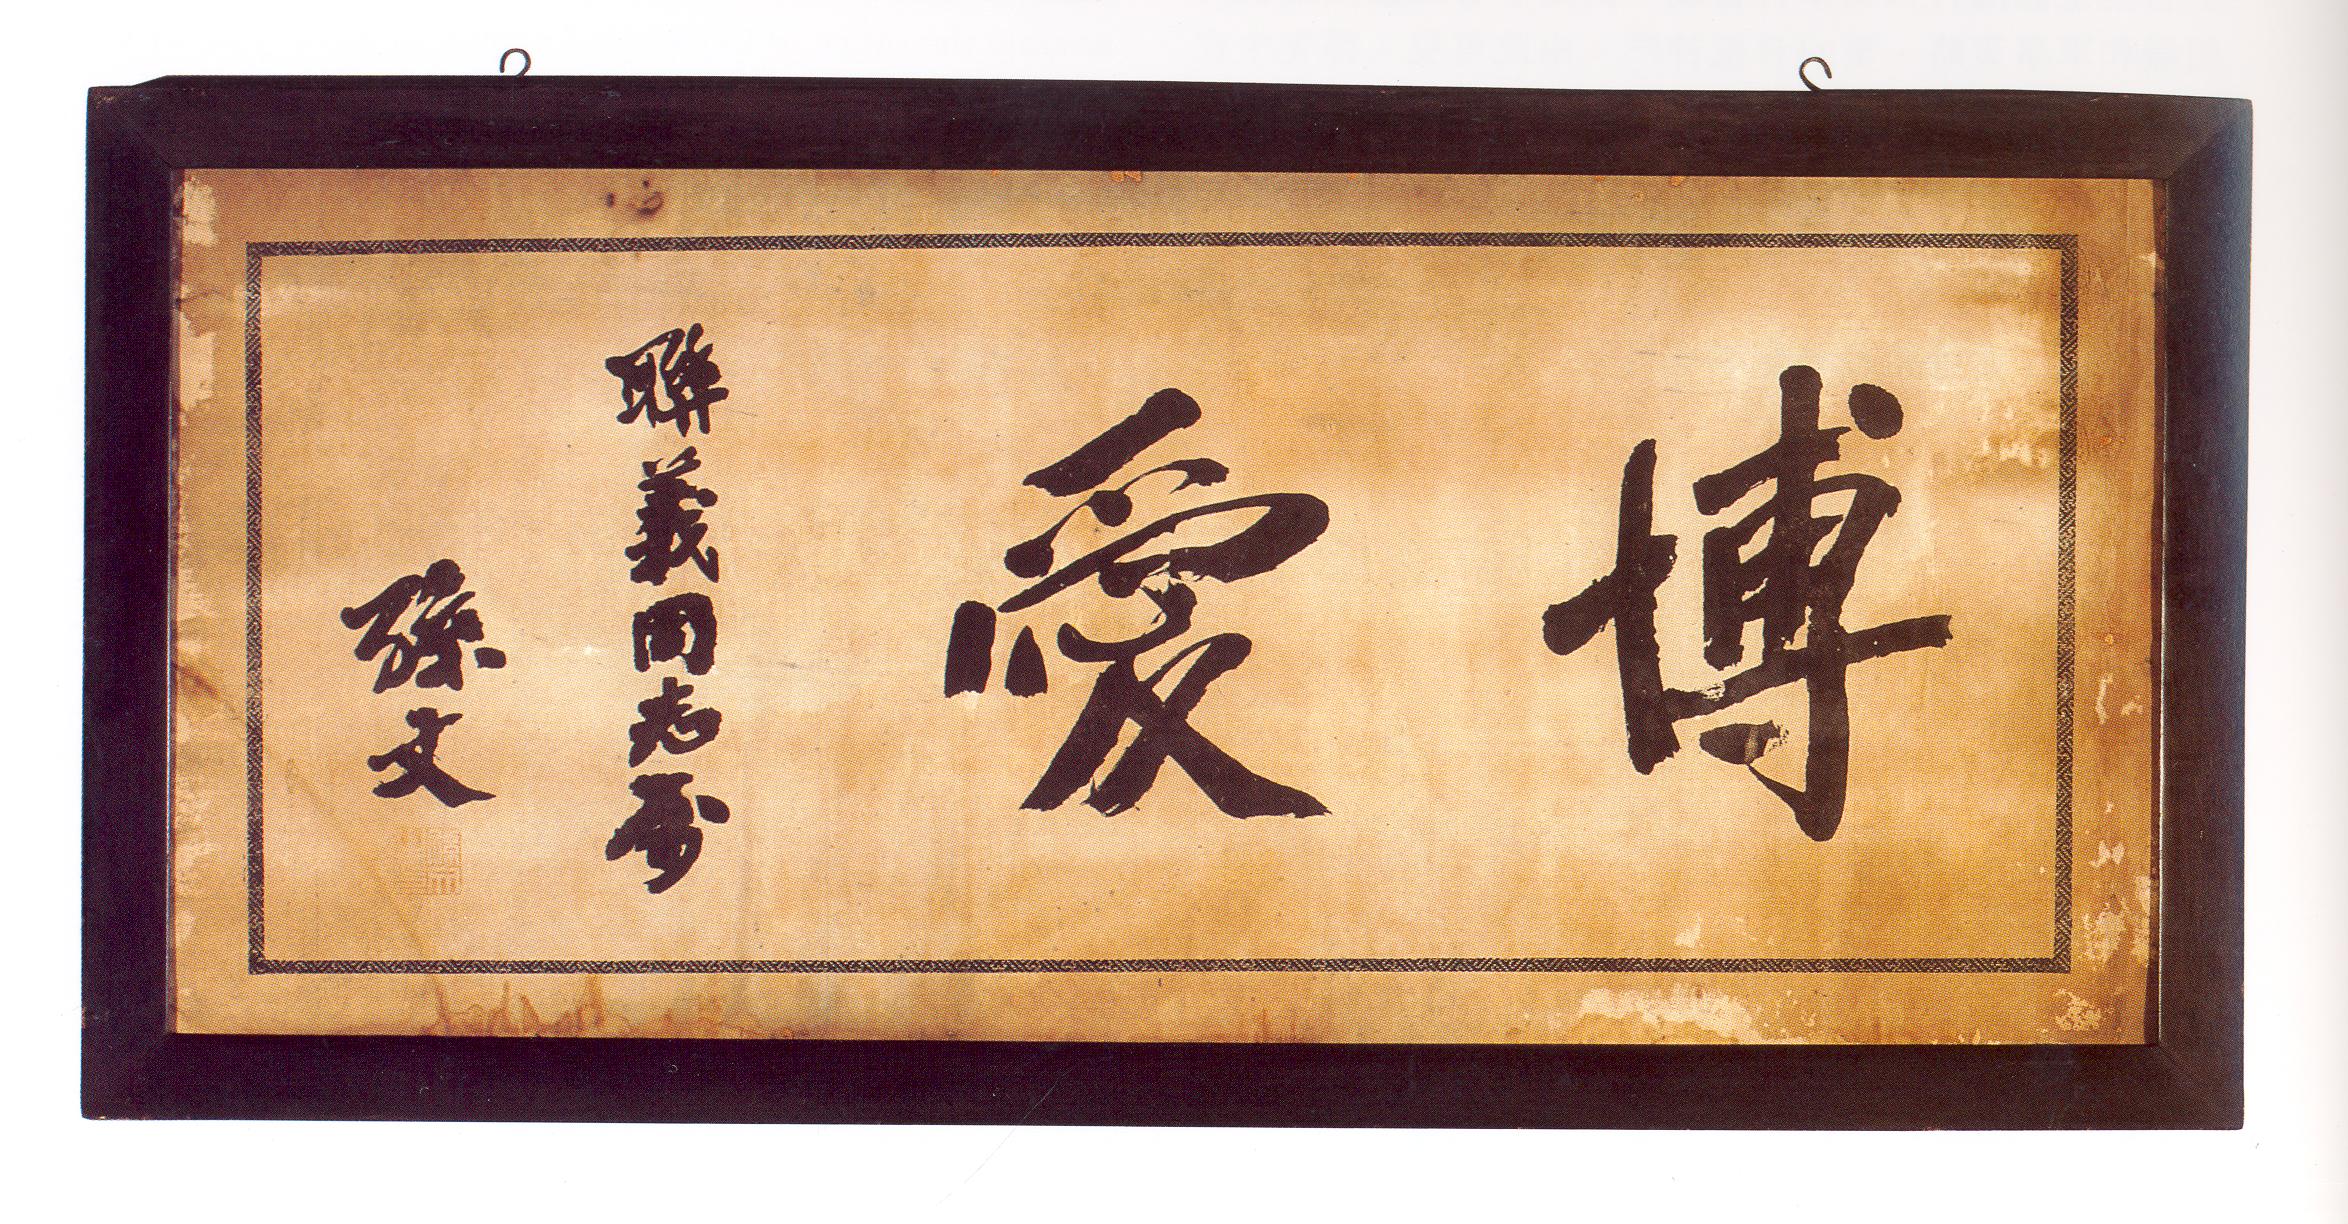 Inscription of Bo Ai by Dr Sun Yat-sen, 1910s. Donated by Too Yee Kok Limited